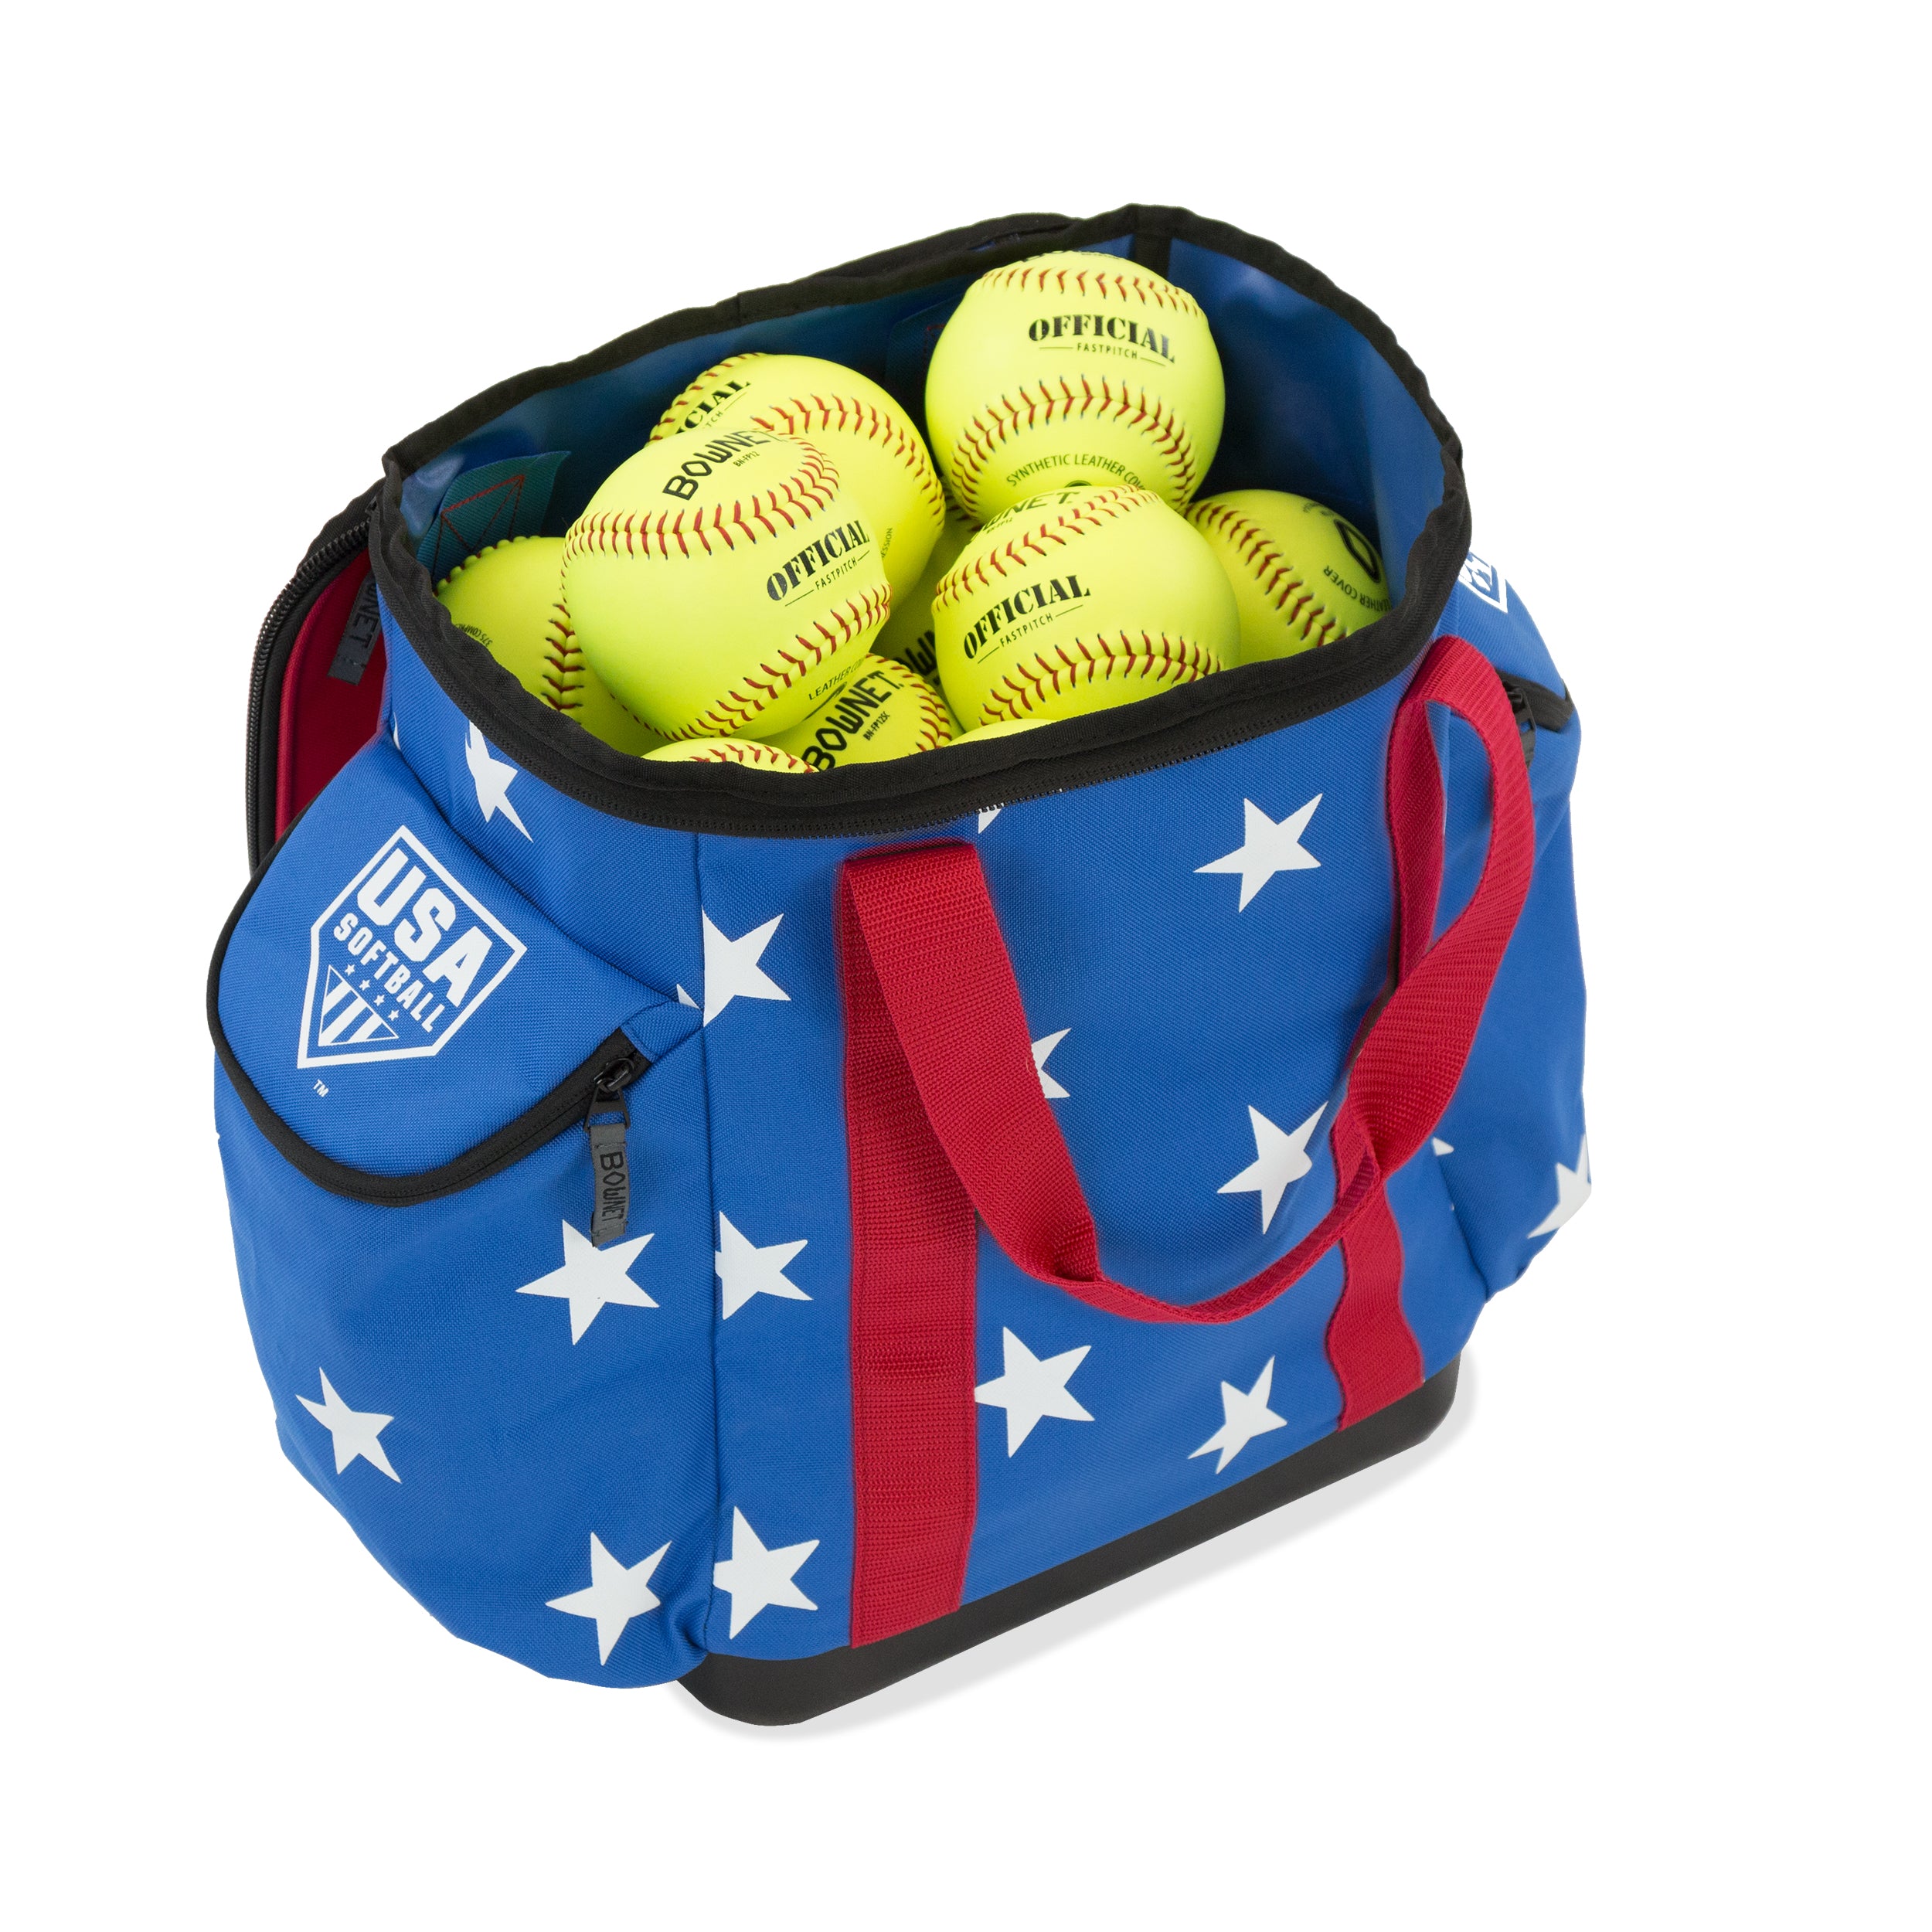 Ball Bag VICTORY – Cosco Store India